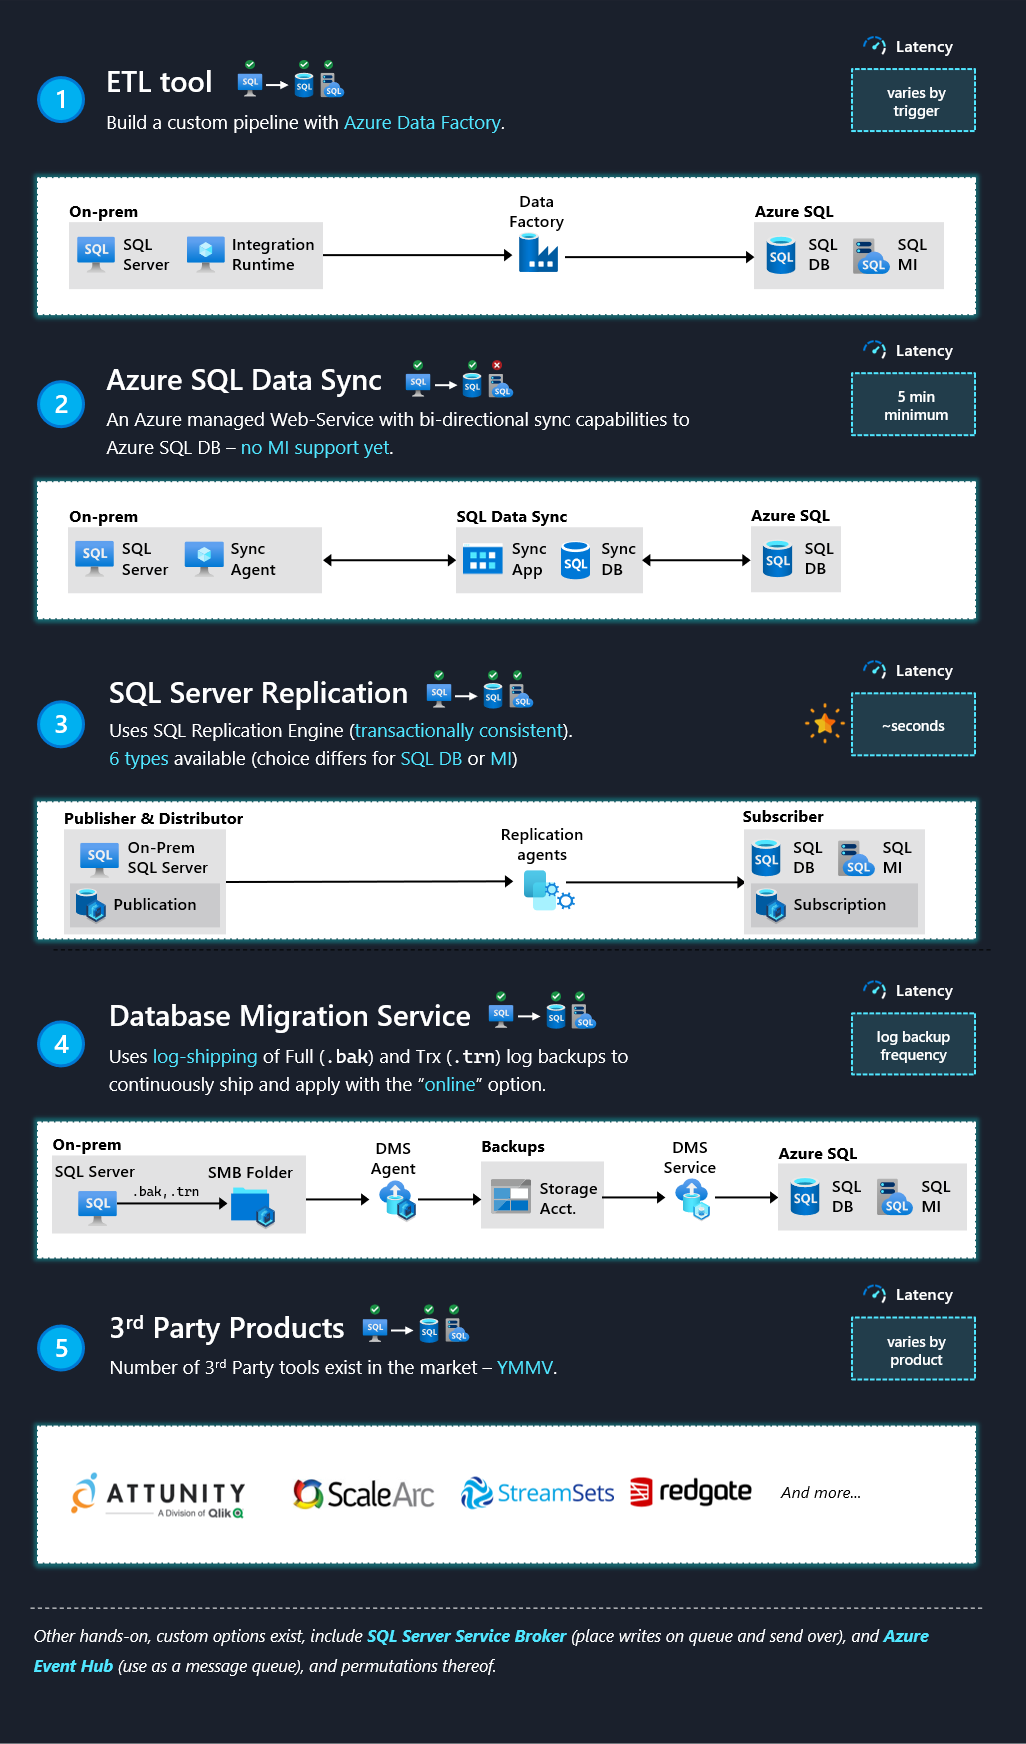 Syncing data from SQL Server to Azure SQL DB & MI